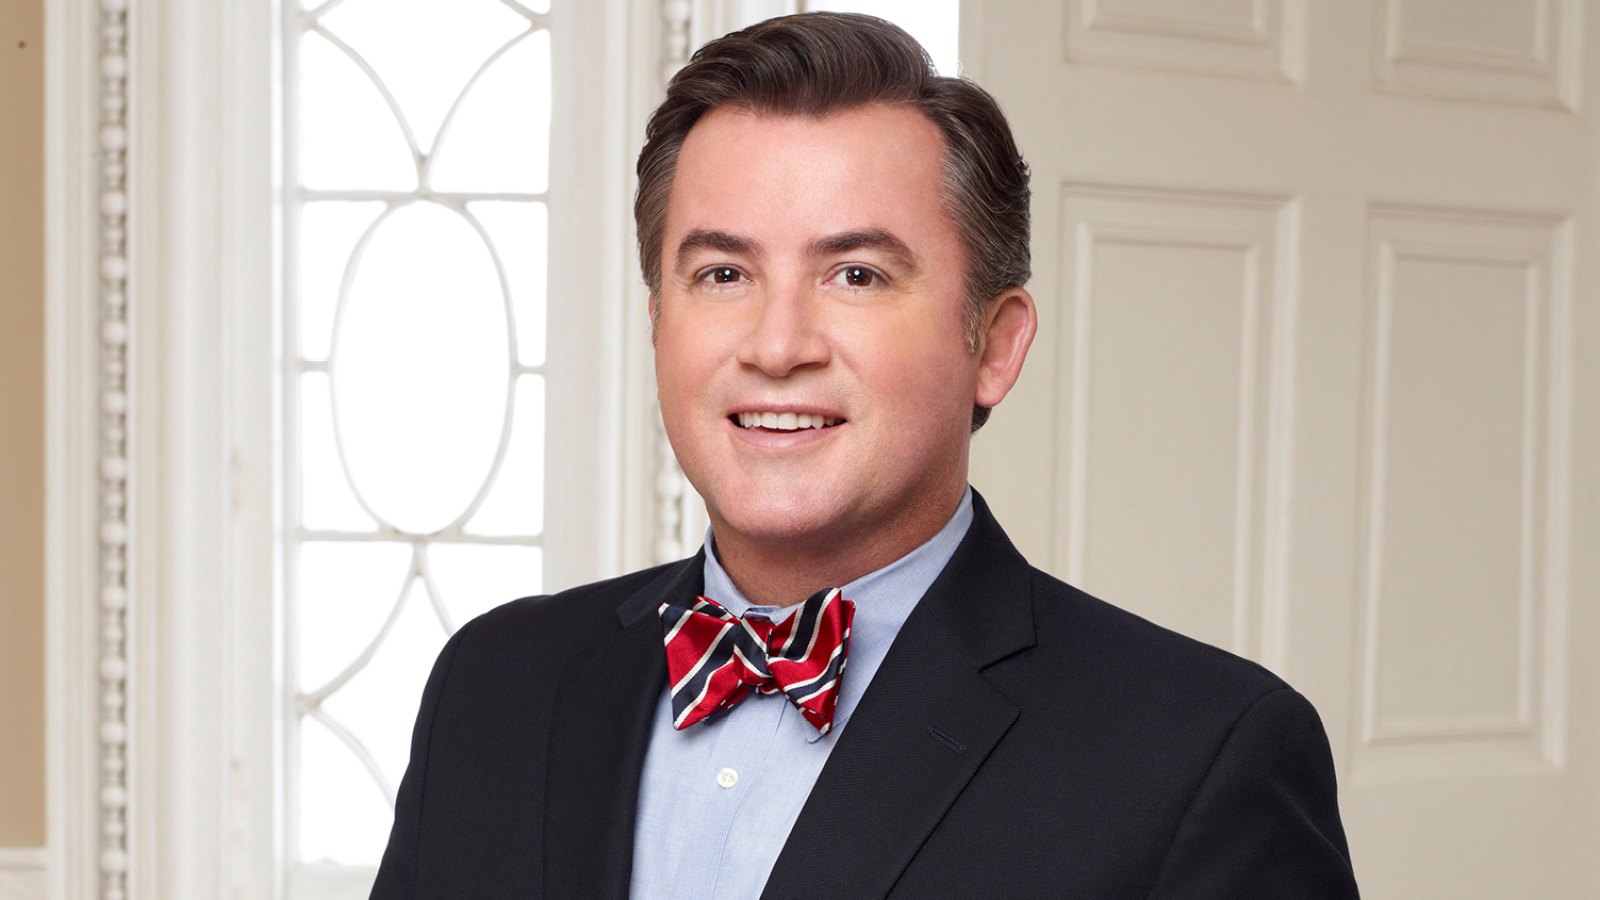 Southern Charm's JD Madison arrested for writing a bad check